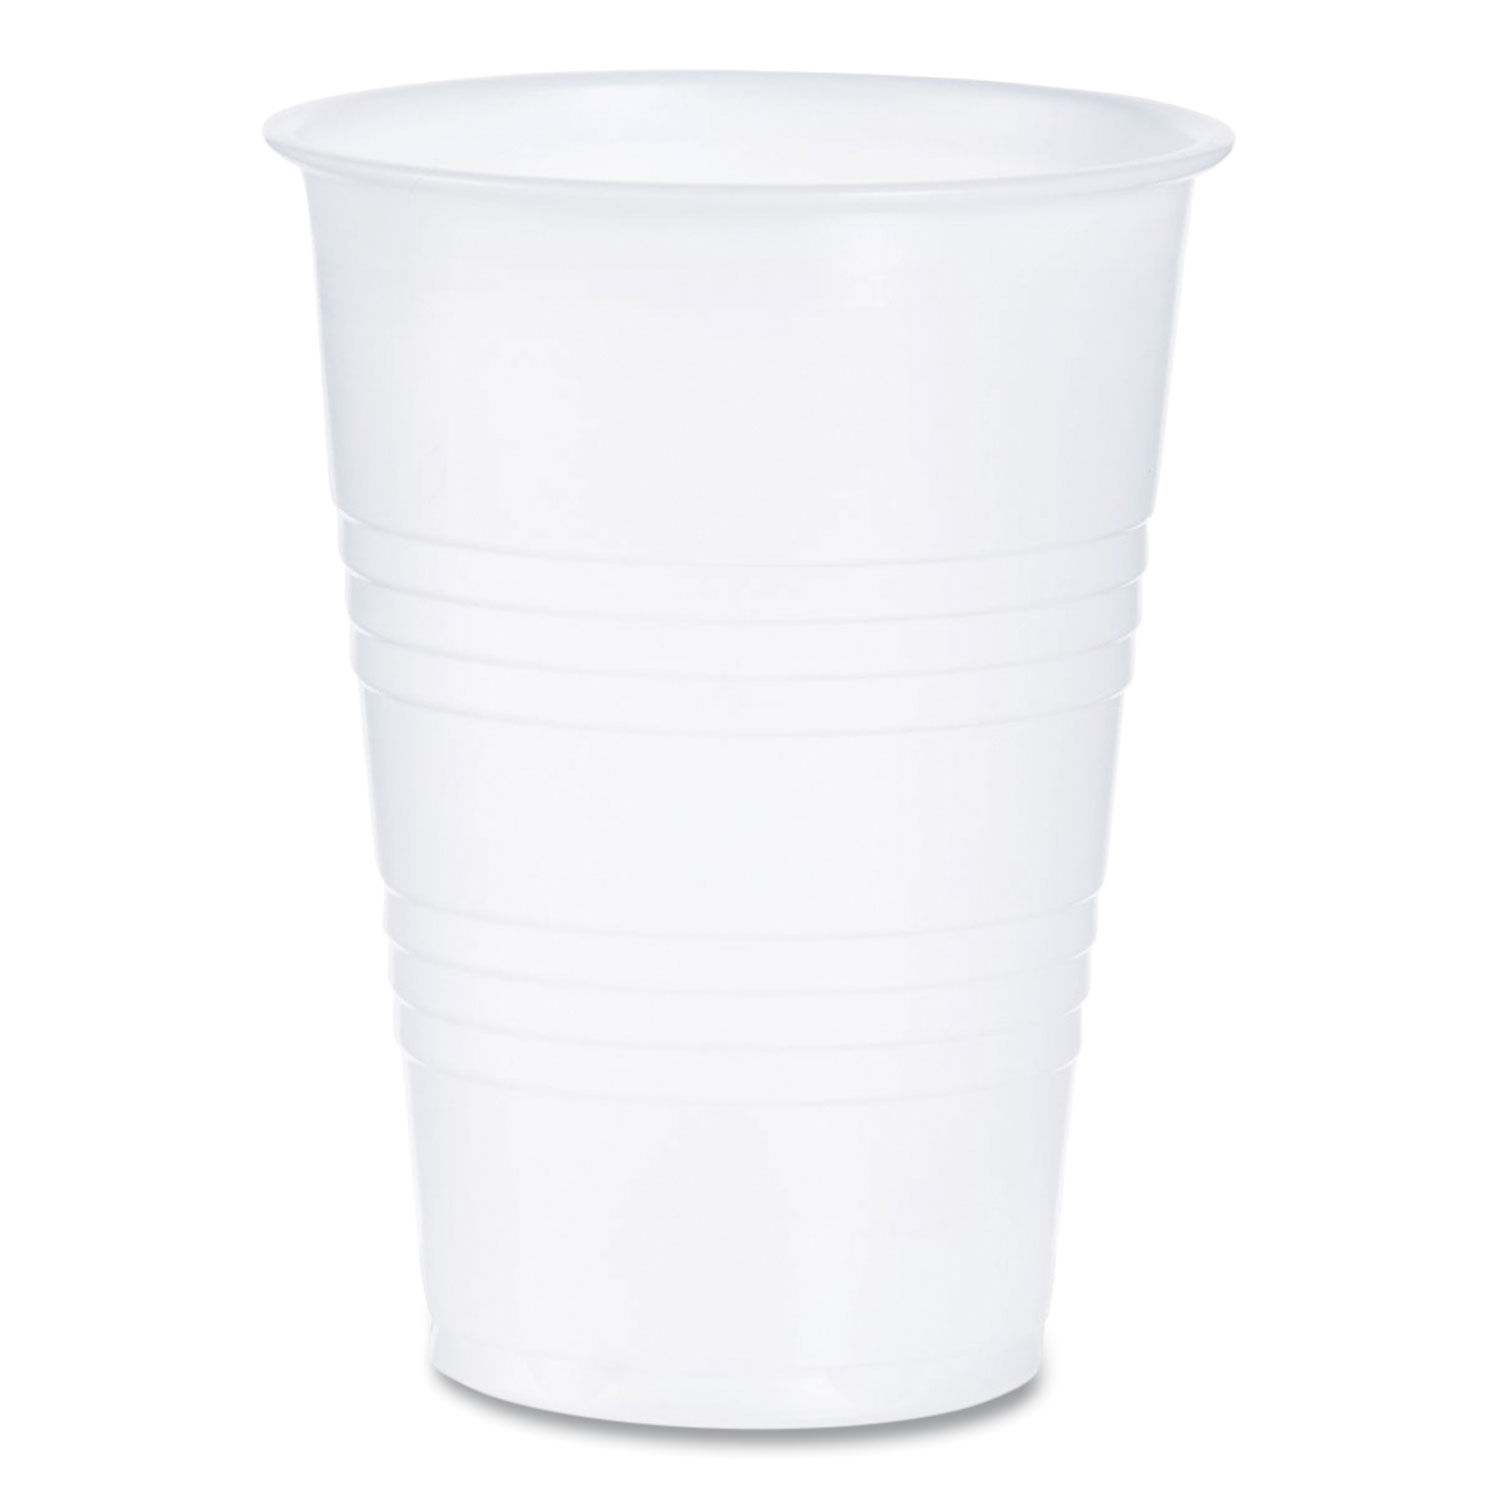 High-Impact Polystyrene Cold Cups, 10 oz, Translucent, 100 Cups/Sleeve, 25 Sleeves/Carton